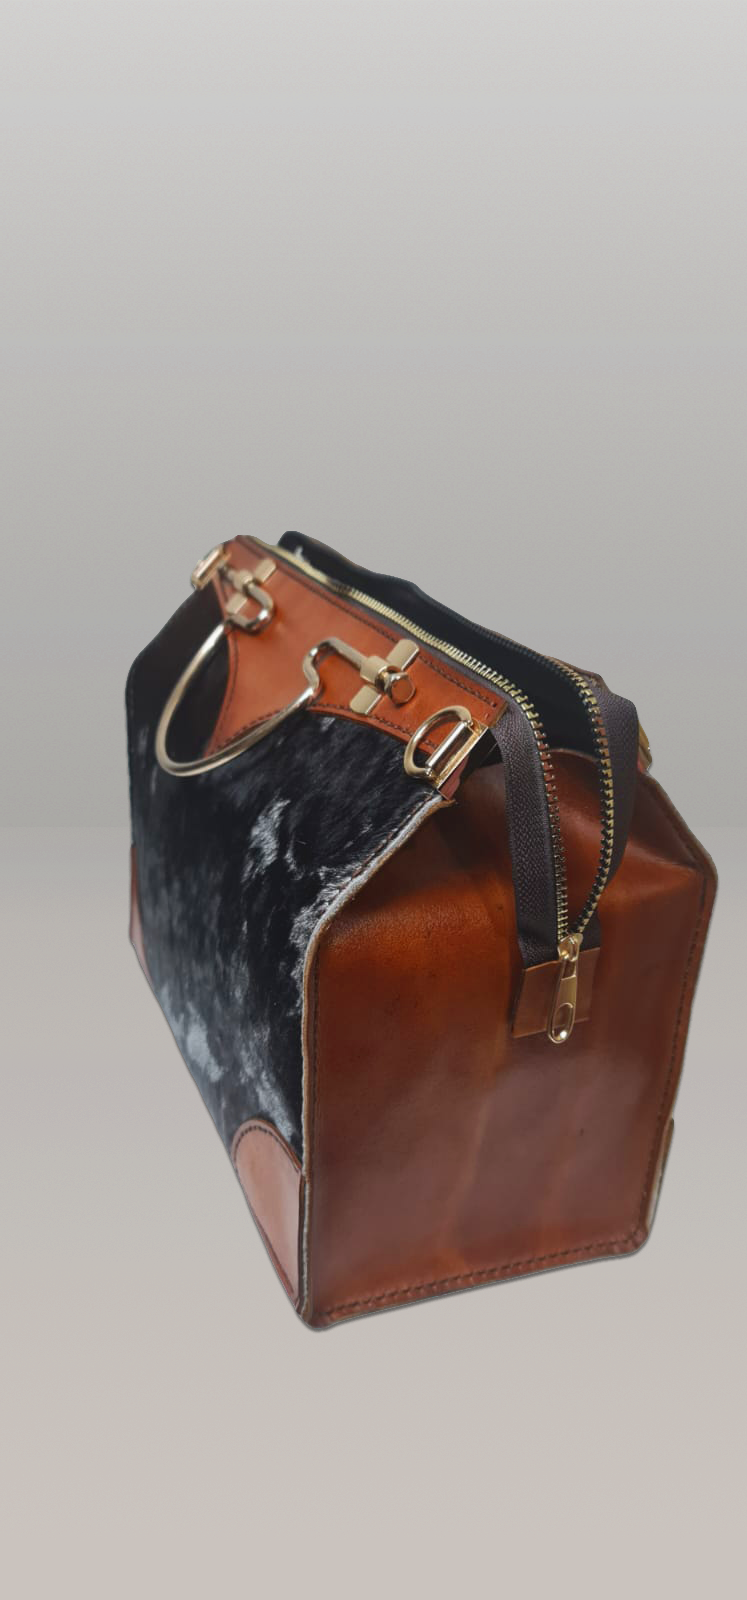 Due tone leather bag with an elegant handle